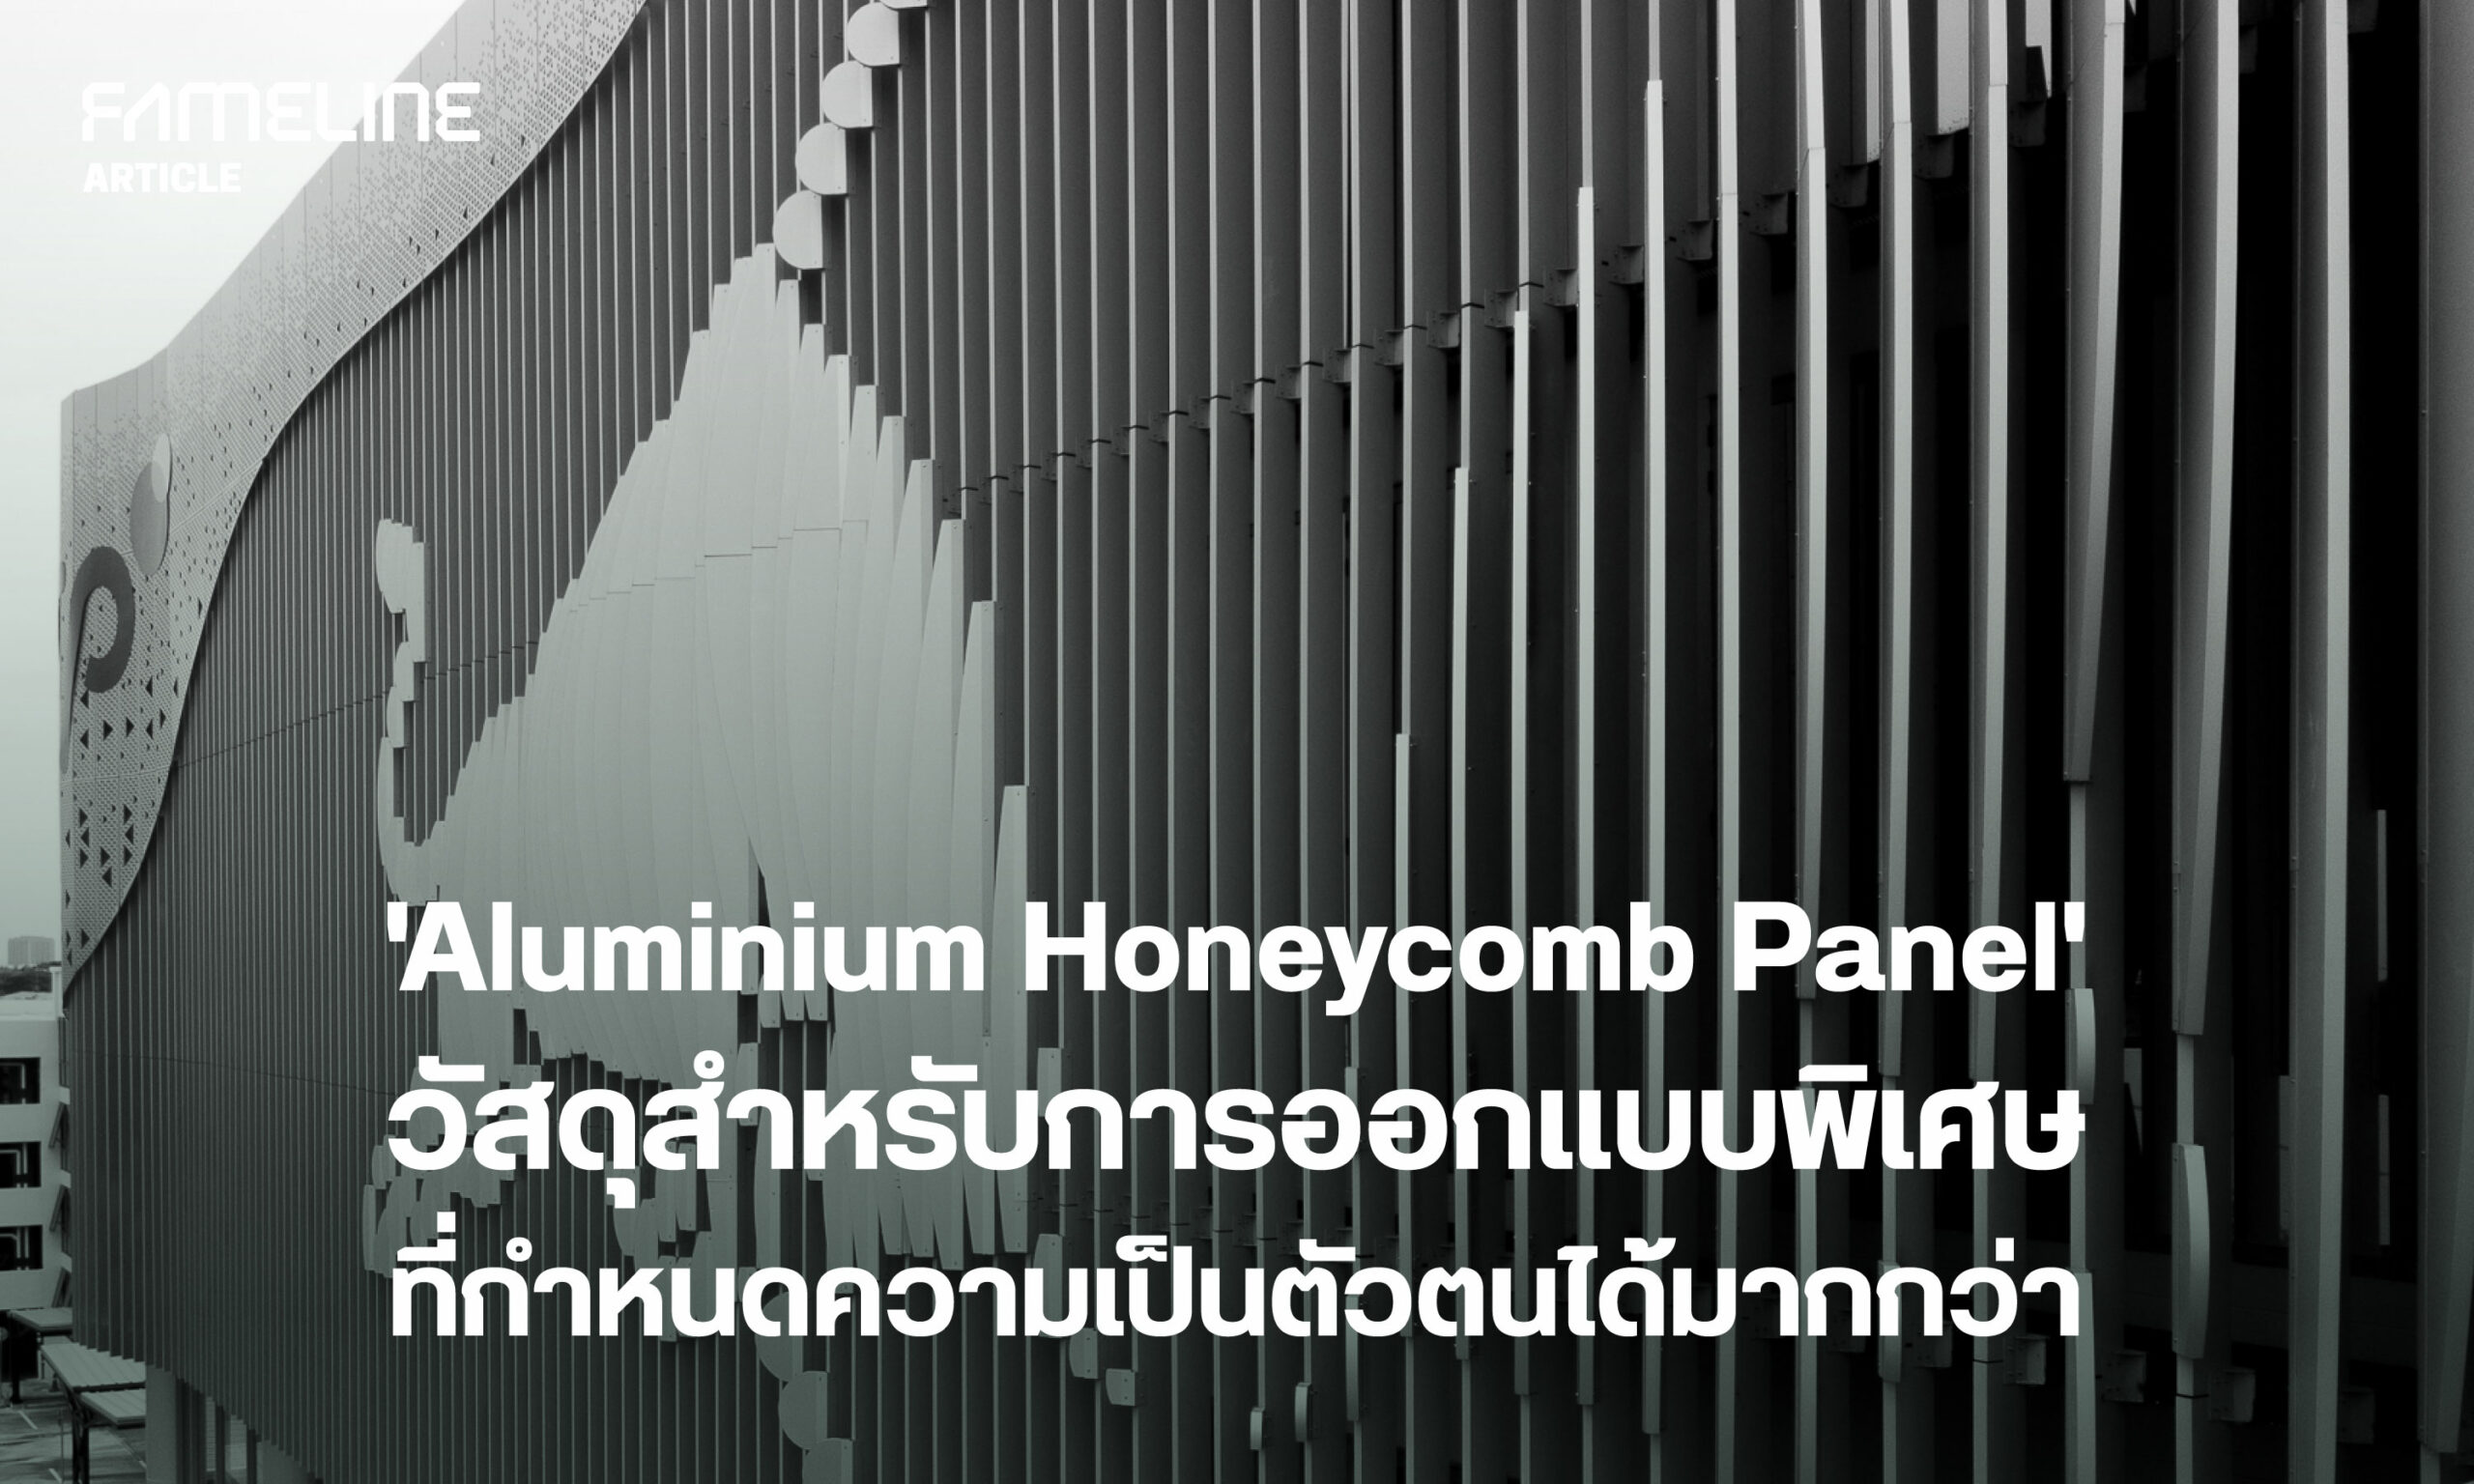 This image features a banner with a modern architectural design. The photograph shows a section of a building façade with a curved shape, overlaid with vertical metal slats that create a rhythmical pattern. The structure of the building appears to utilize 'Aluminium Honeycomb Panels,' as highlighted in large bold text across the image. This architectural solution is likely emphasized for its properties or as the subject of the article indicated in the banner. The image is monochromatic, giving it a sleek and professional appearance.